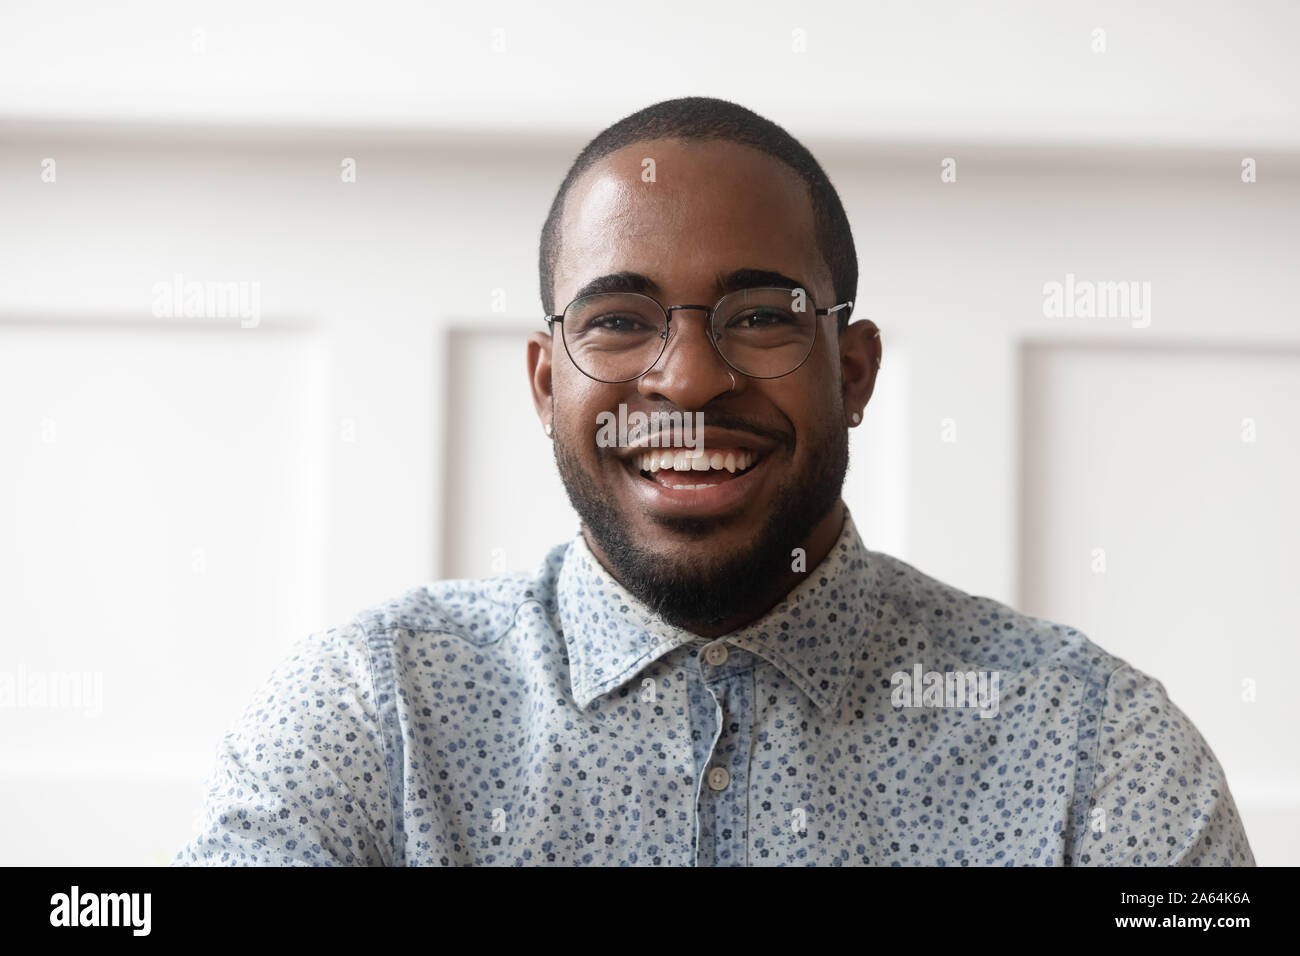 Portrait of smiling black man looking at camera Stock Photo